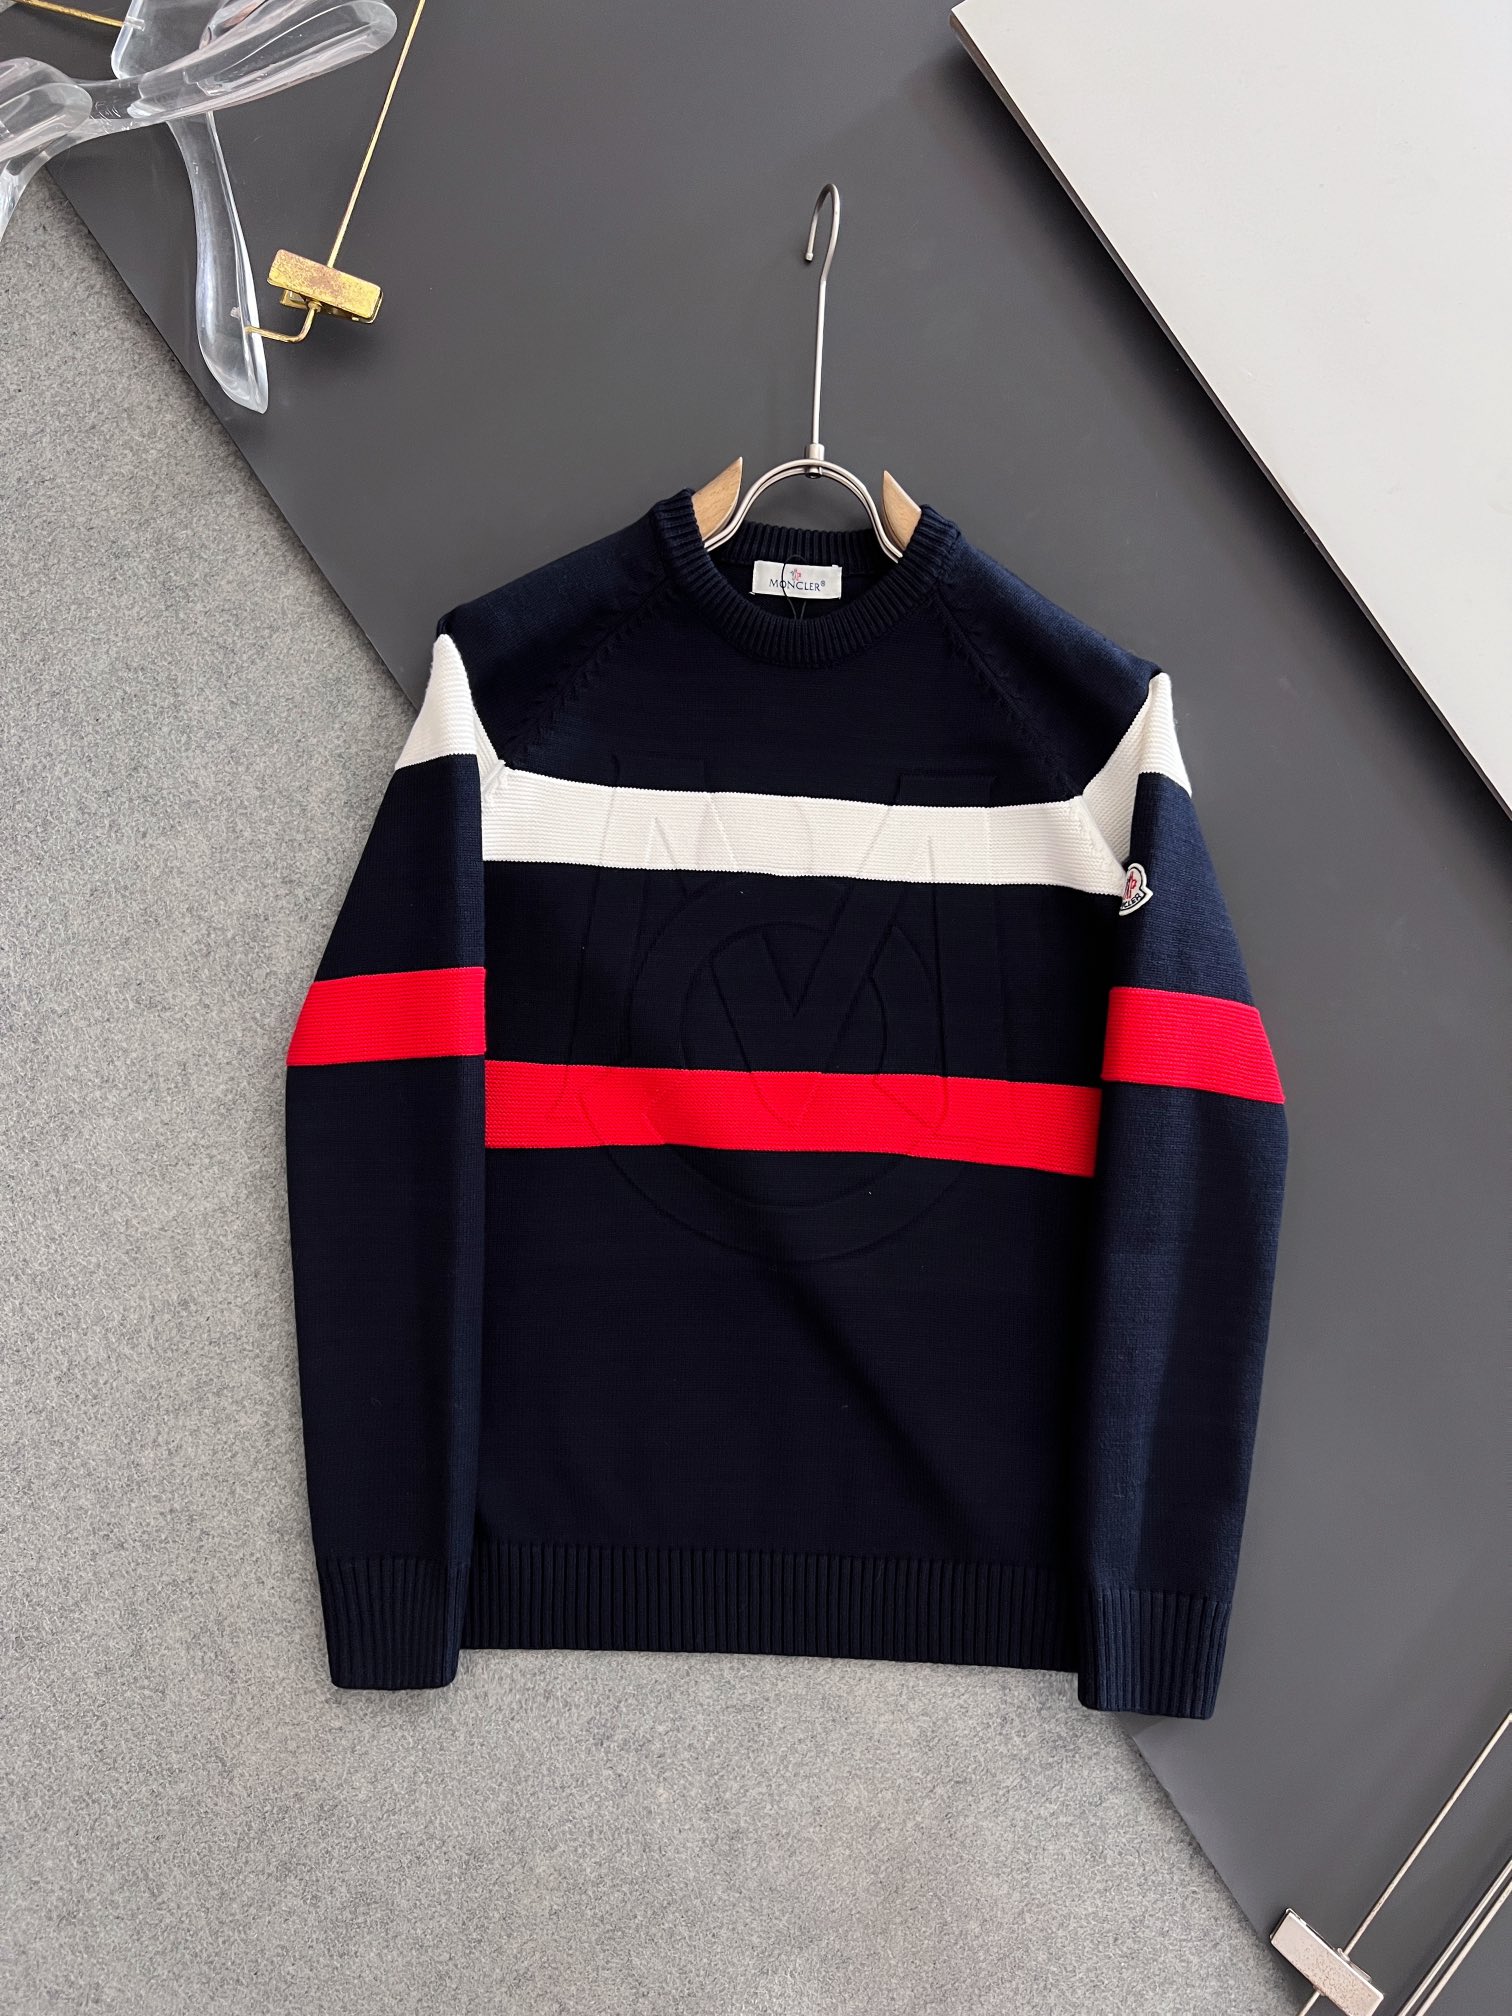 Moncler Clothing Sweatshirts Buy best quality Replica
 Black Knitting Wool Fall/Winter Collection Fashion